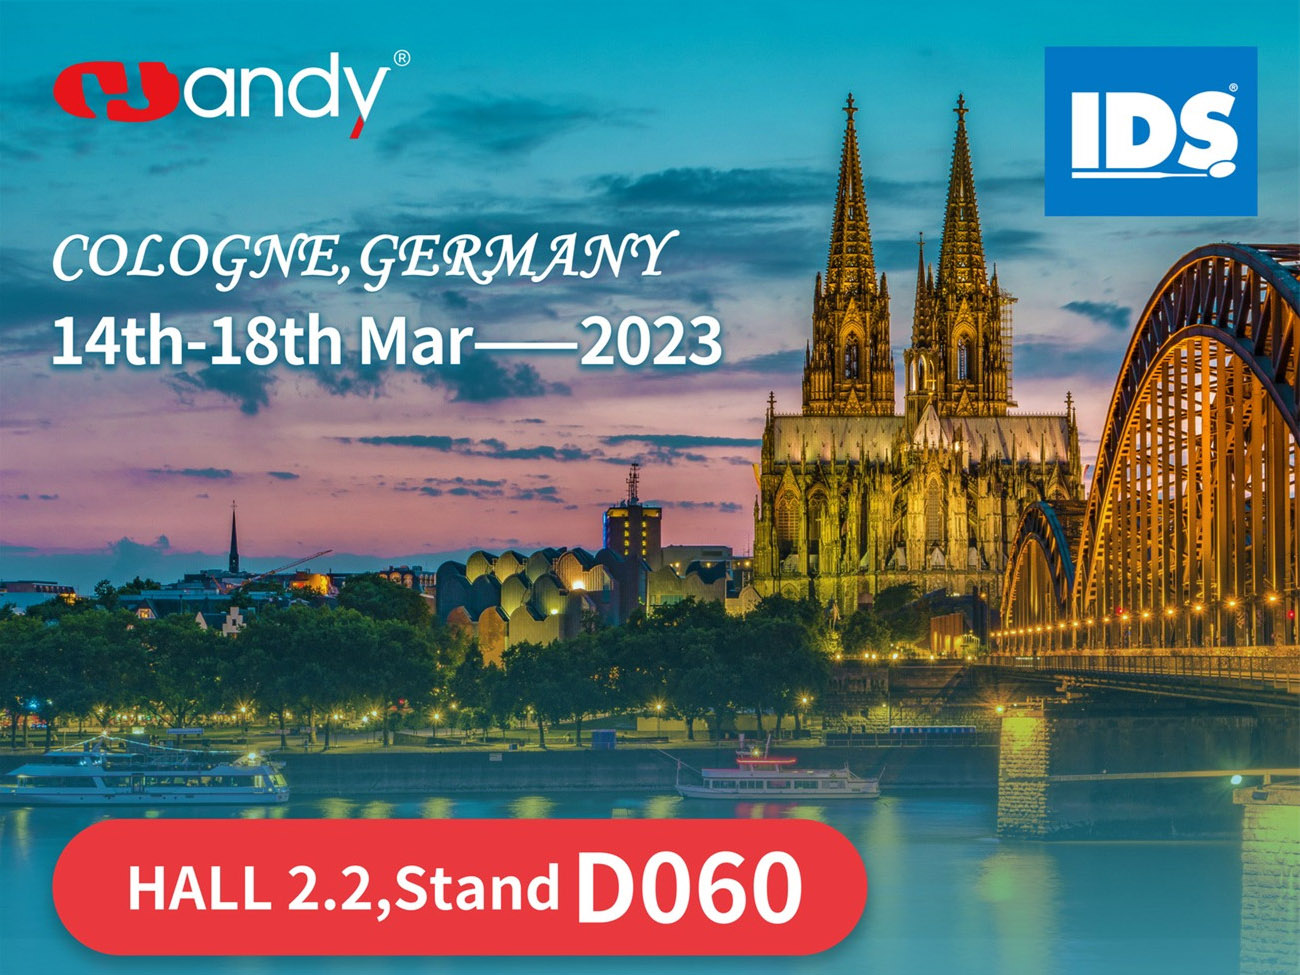 Handy Medical Will Bring Its Intraoral Digital Imaging Products to IDS 2023